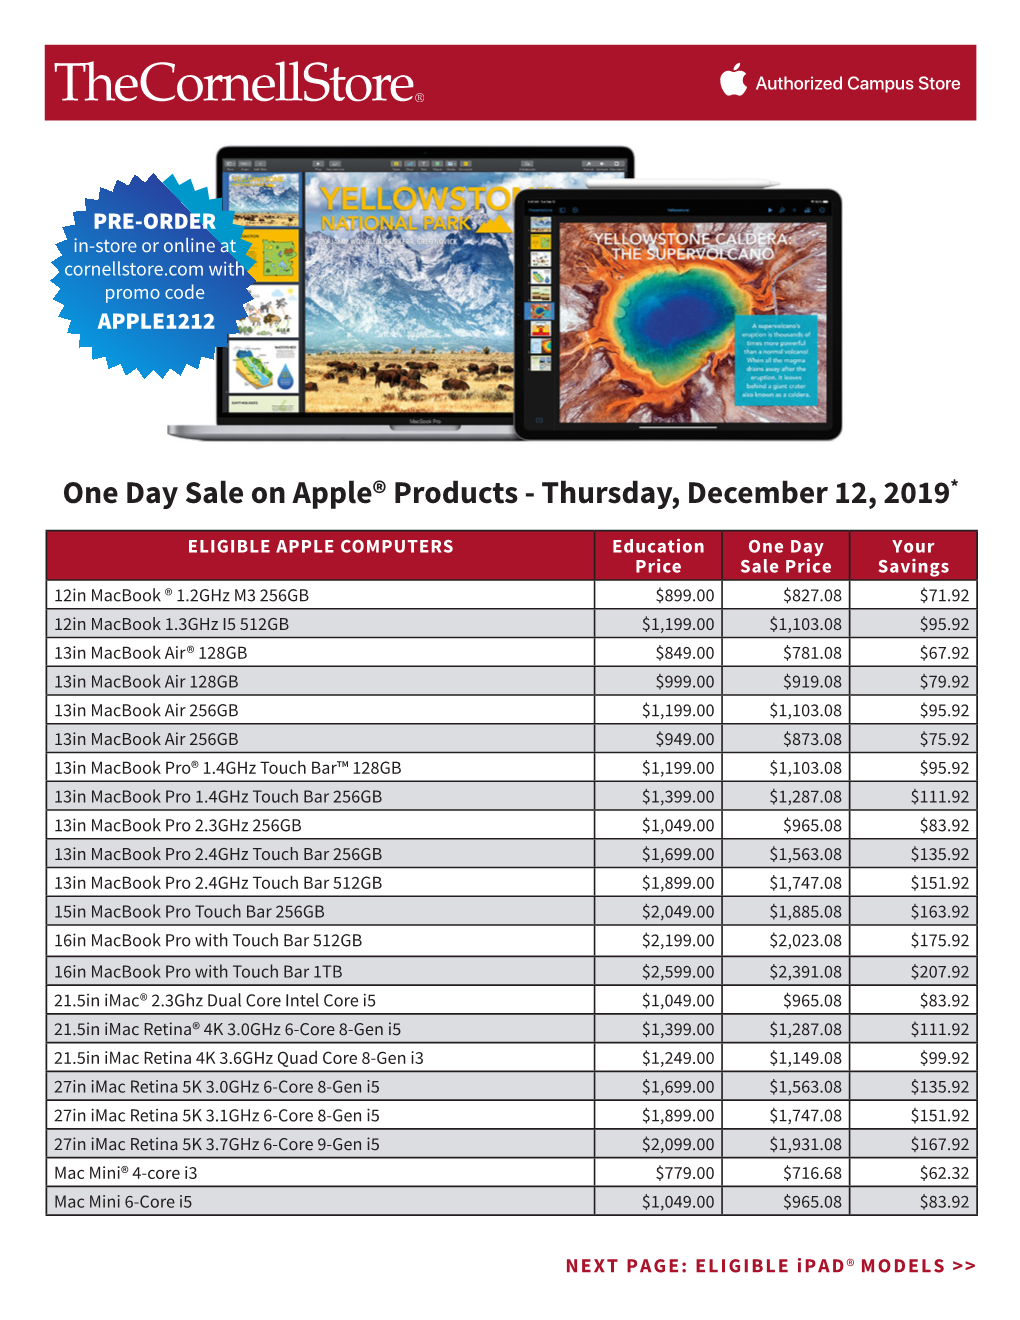 One Day Sale on Apple® Products - Thursday, December 12, 2019*